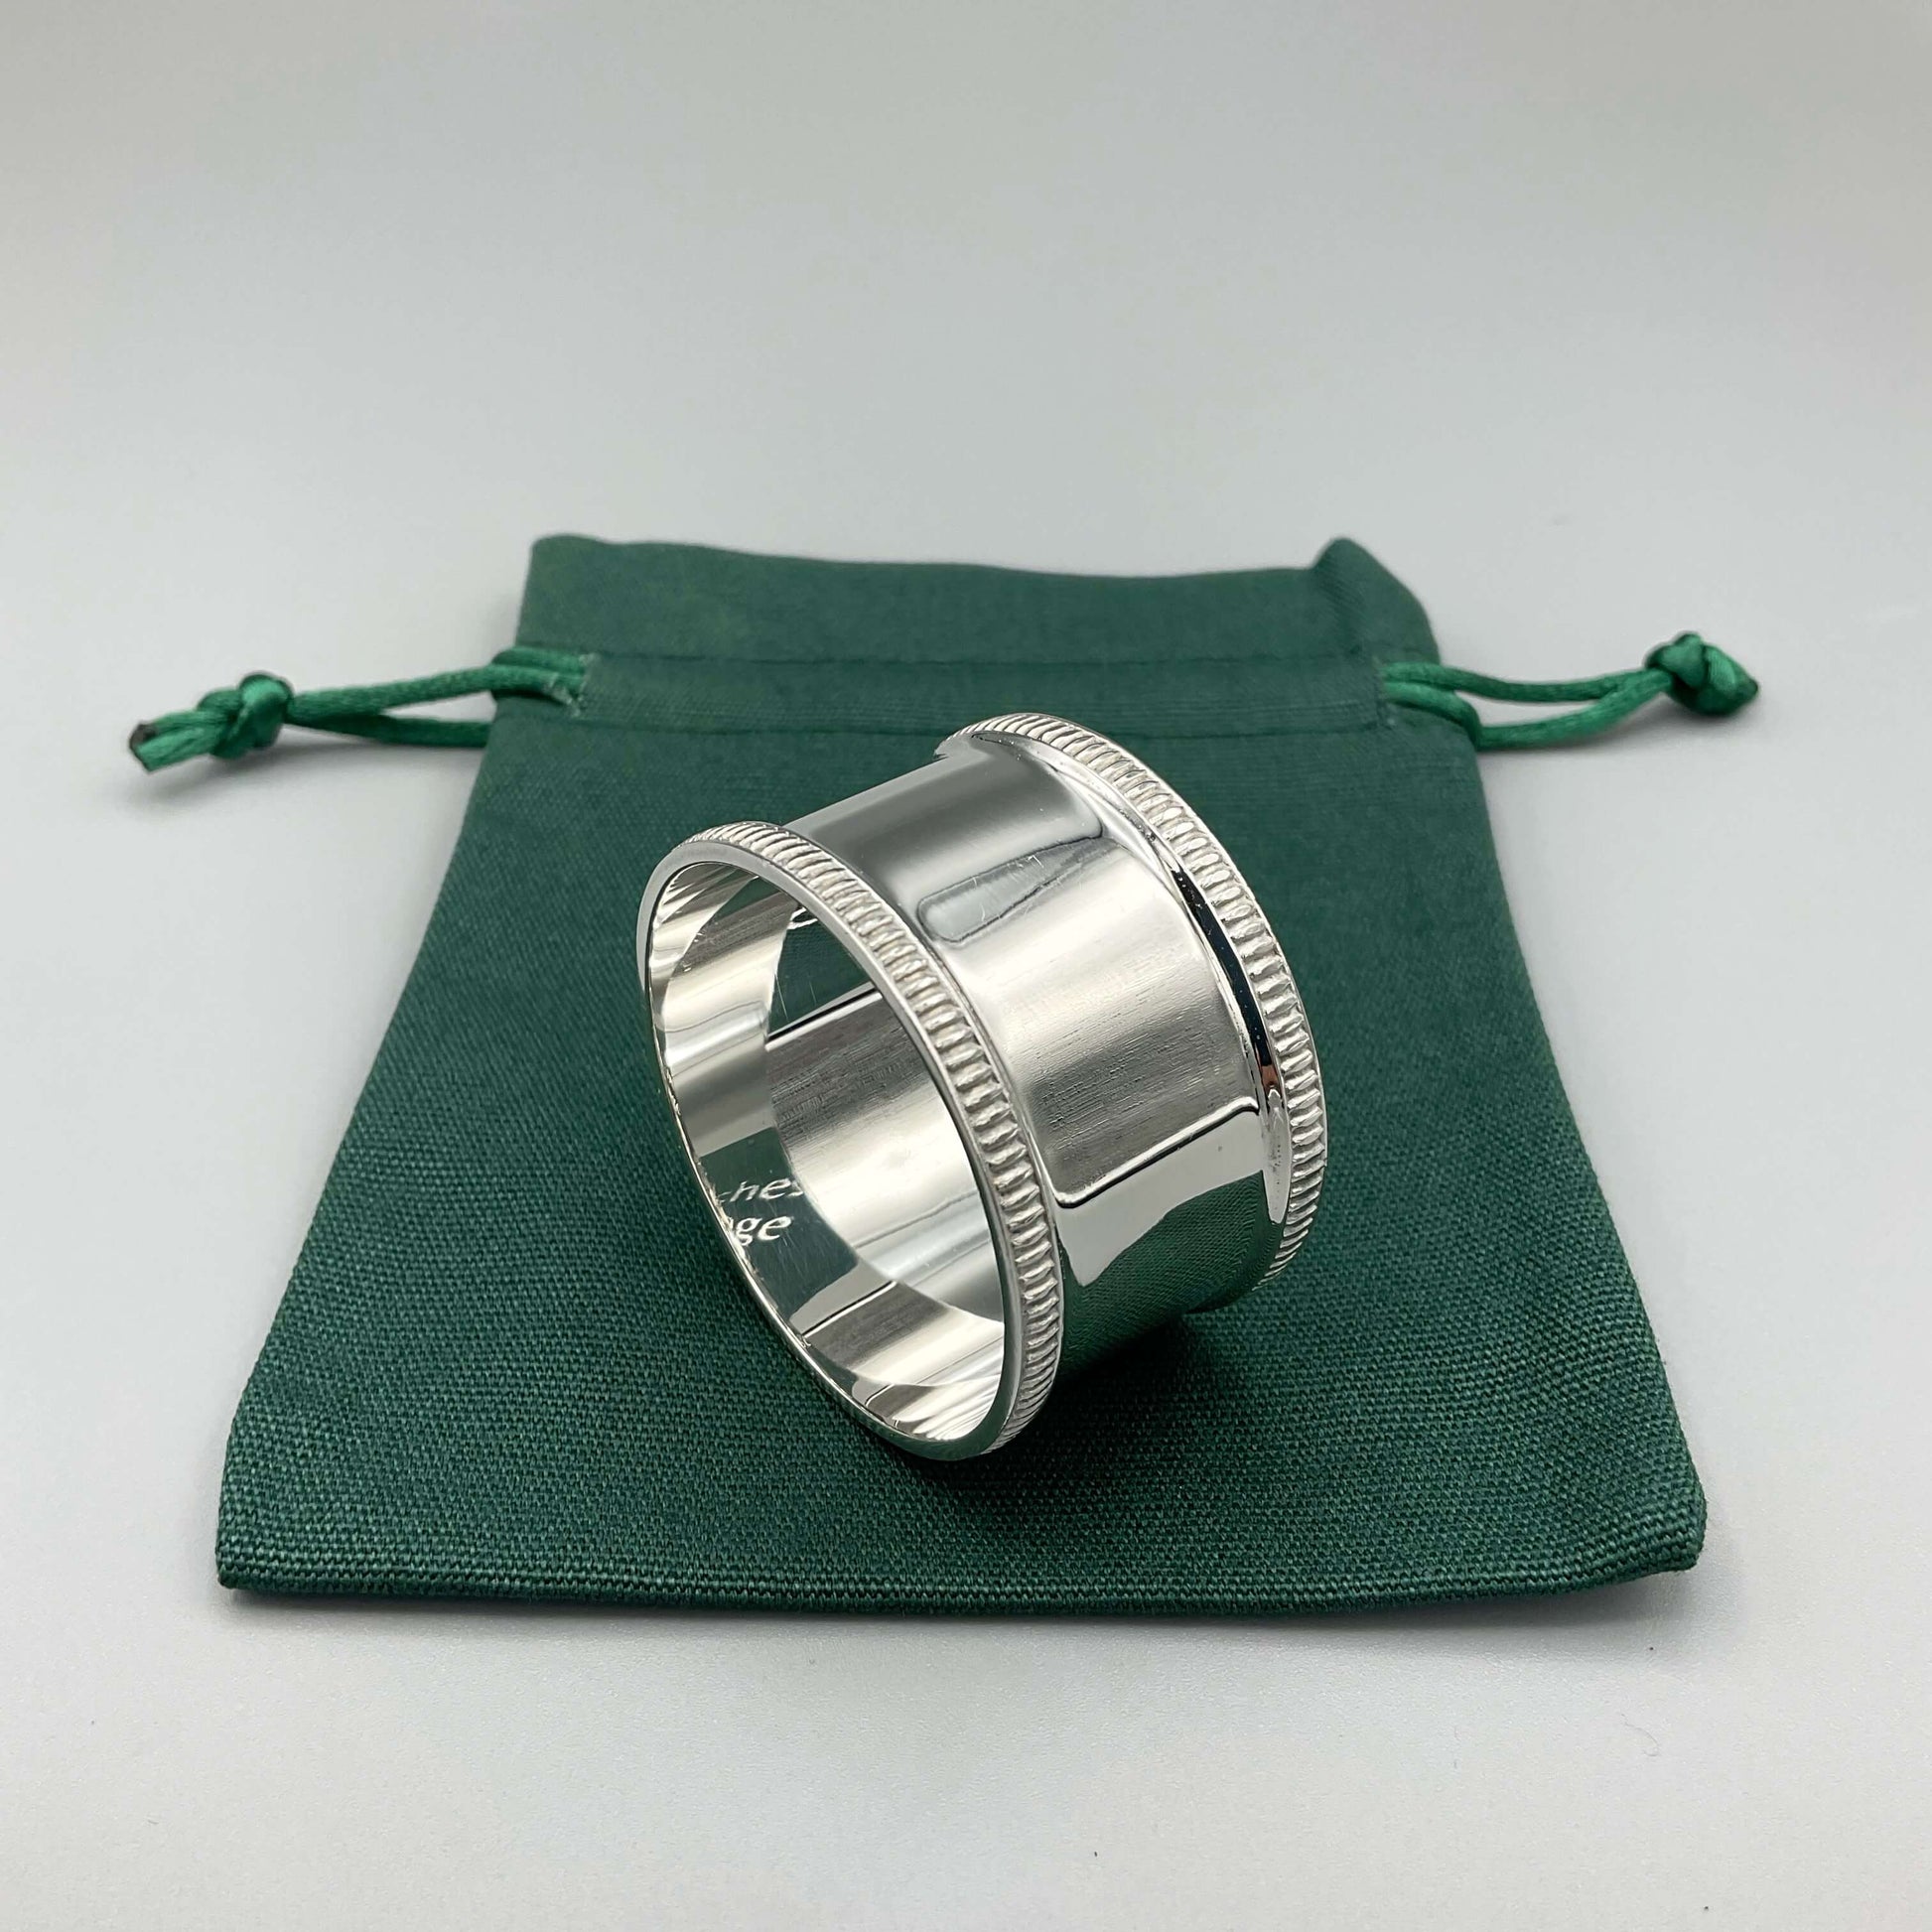 Shiny silver napkin ring on a green cotton gift bag